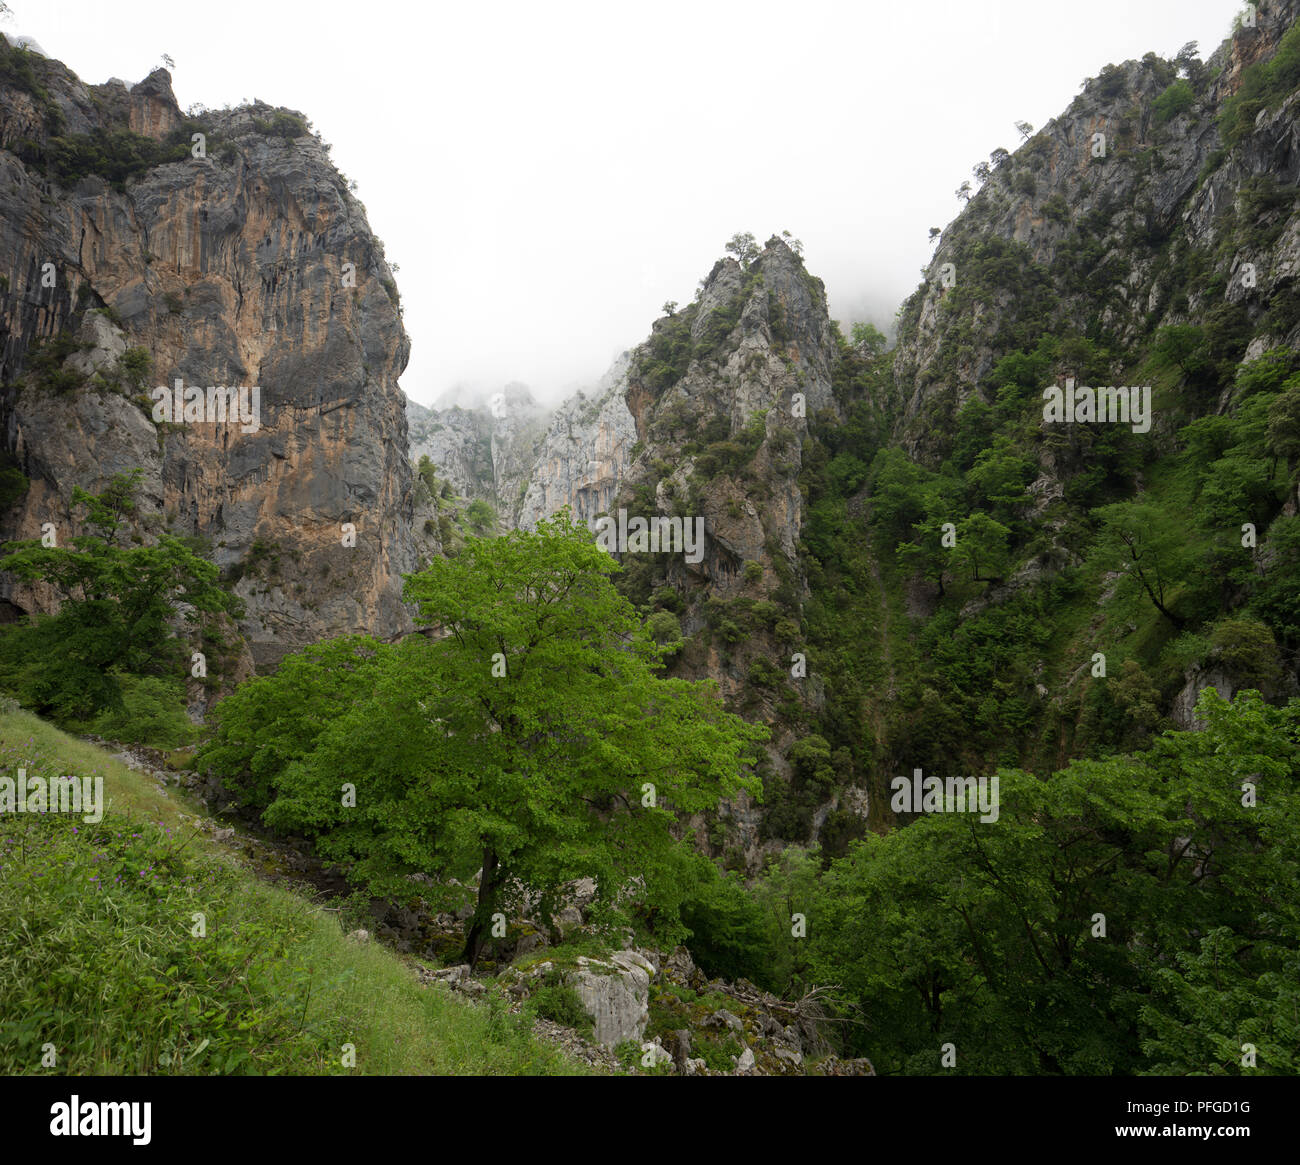 trees hug and cling the steep slopes in the Cares river gorge, Picos de Europa, Spain Stock Photo